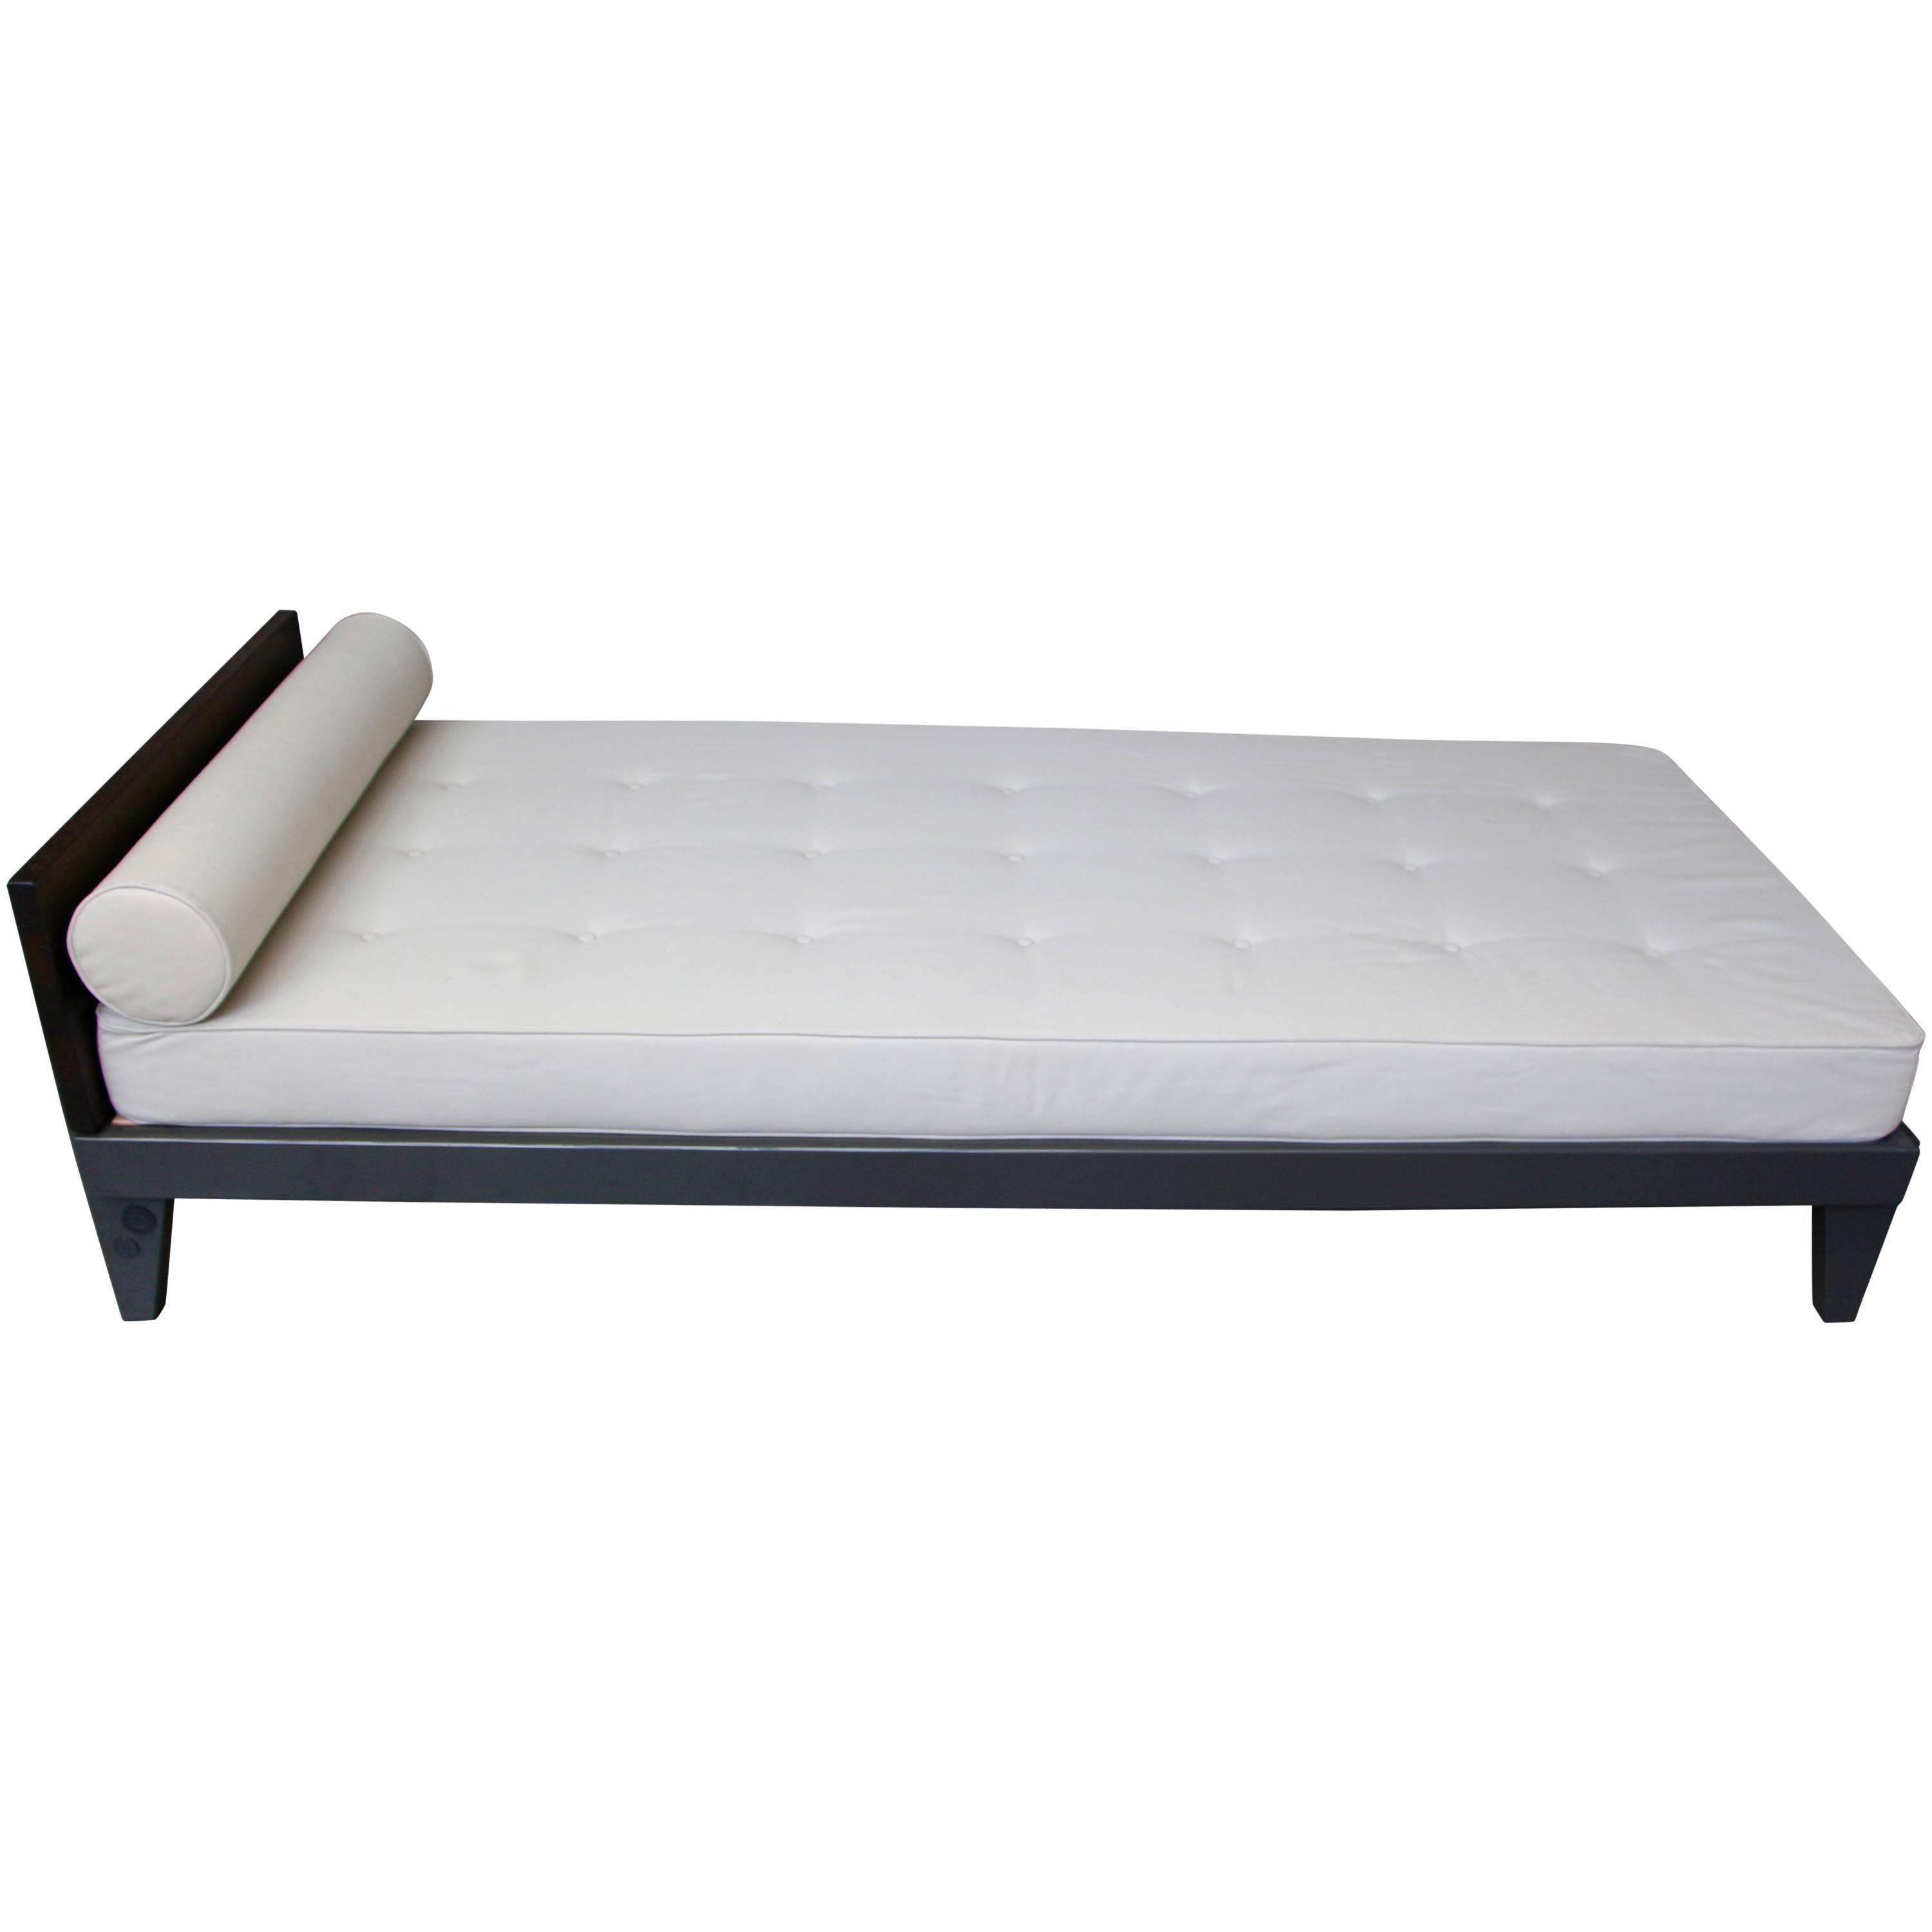 2011 Jean Prouve by G-Star Raw for Vitra S.A.M. Lit Flavigny Daybed 049